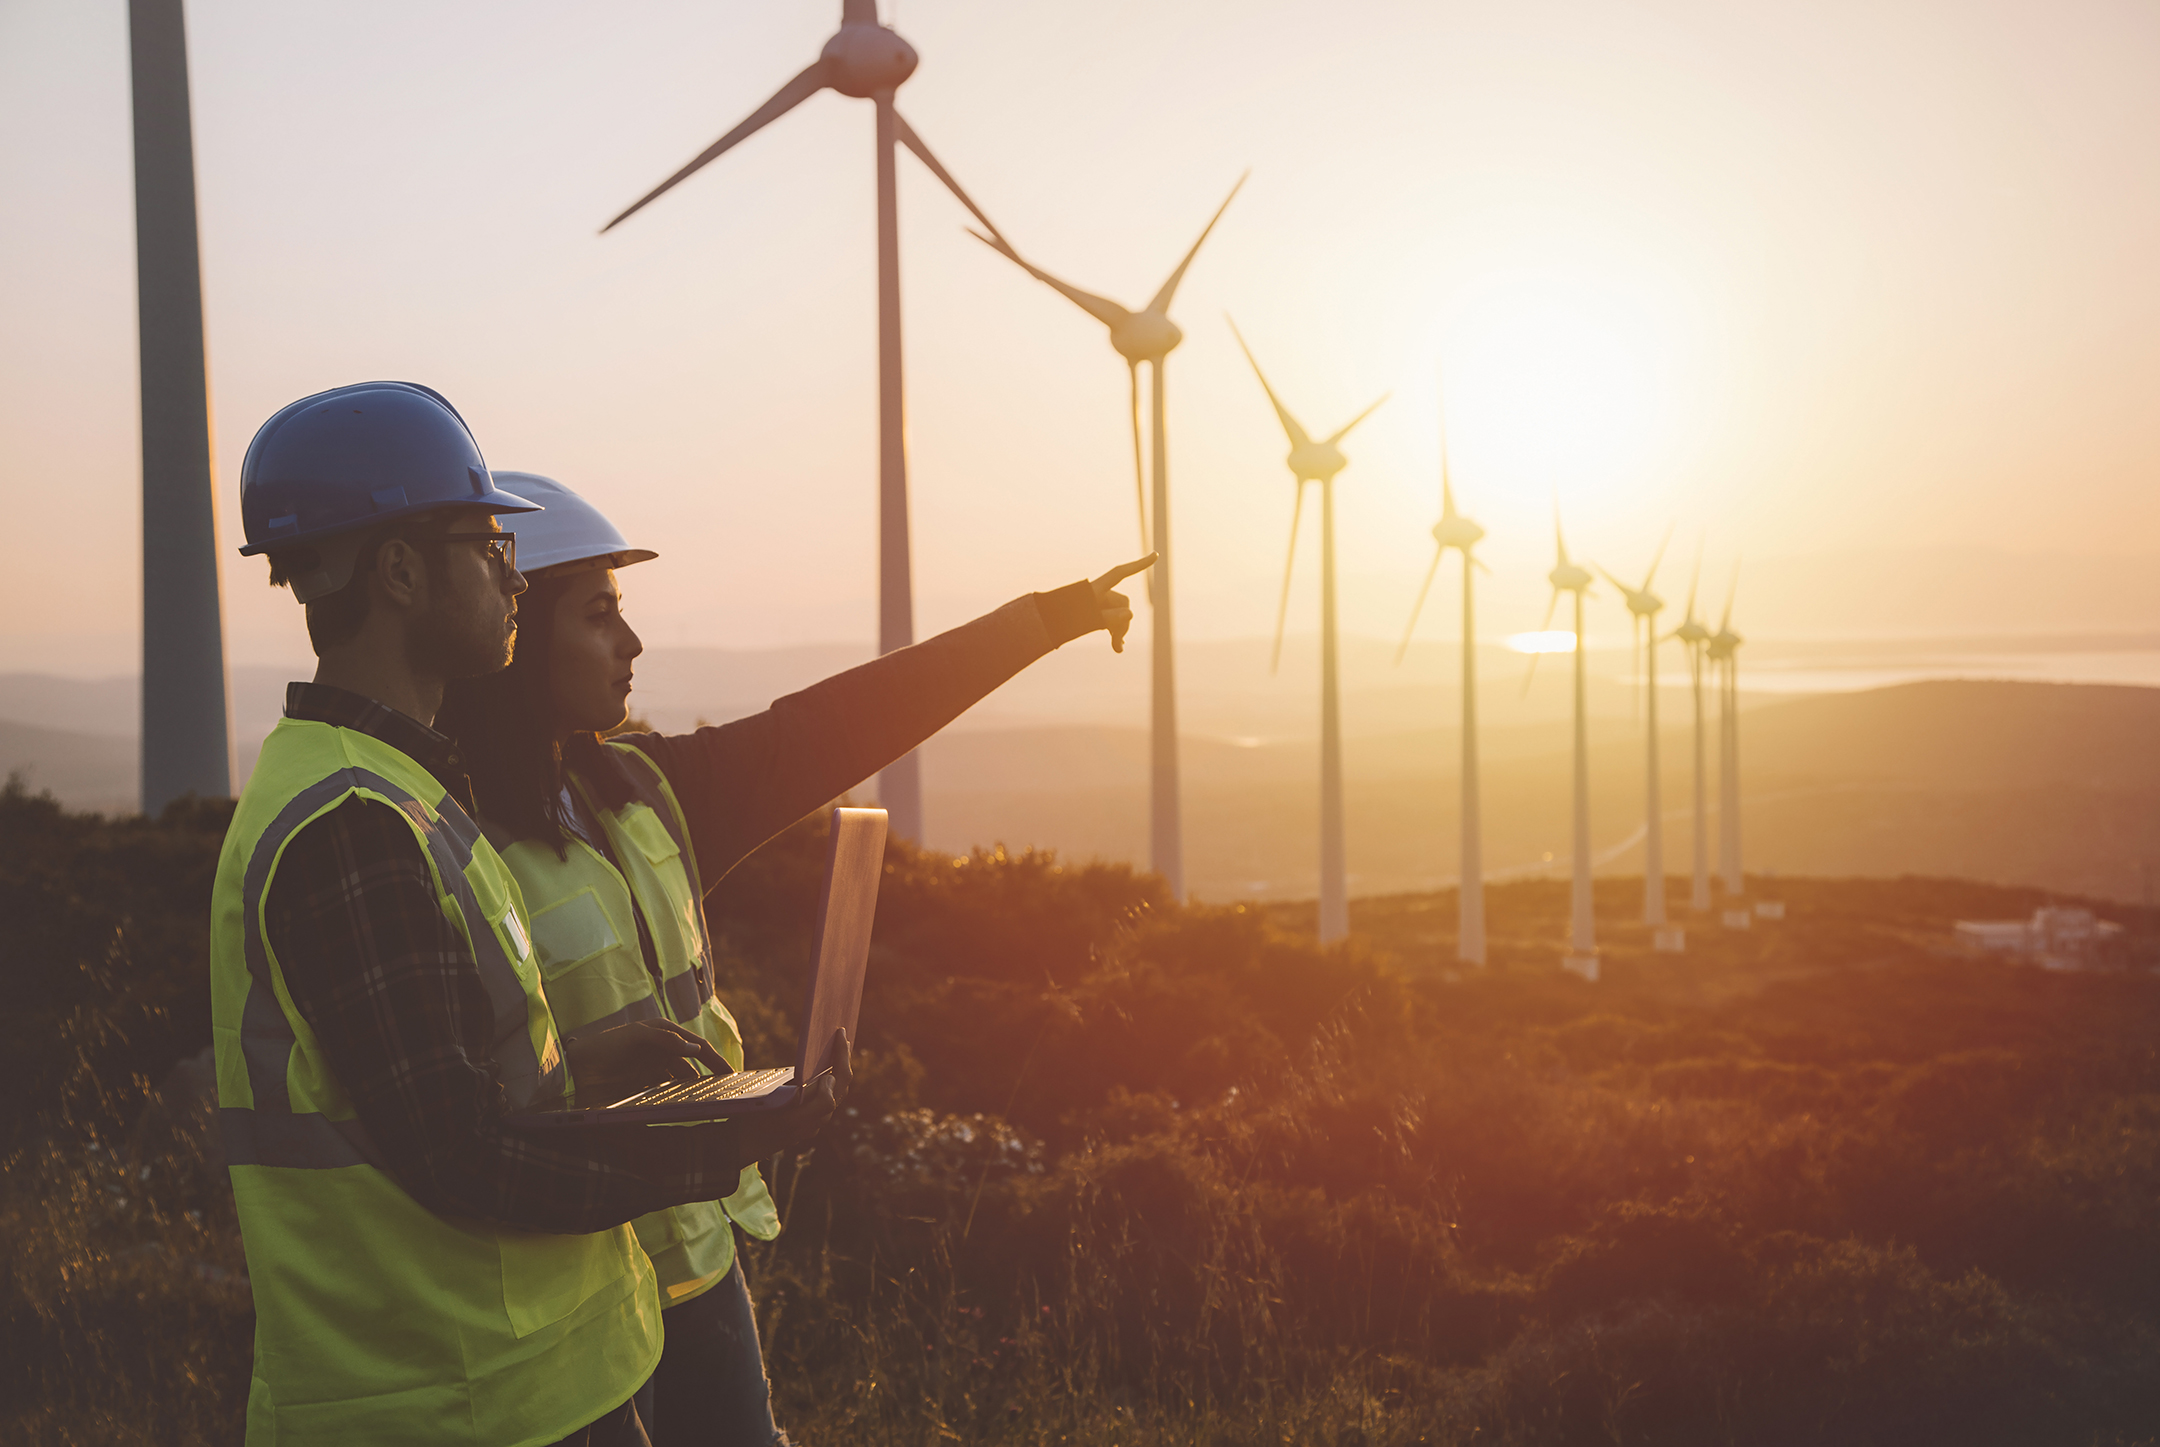 a man and a woman wearing hard hats and work vests stand in front of a row of wind energy turbines in a field during sunset, the woman pointing to the right 